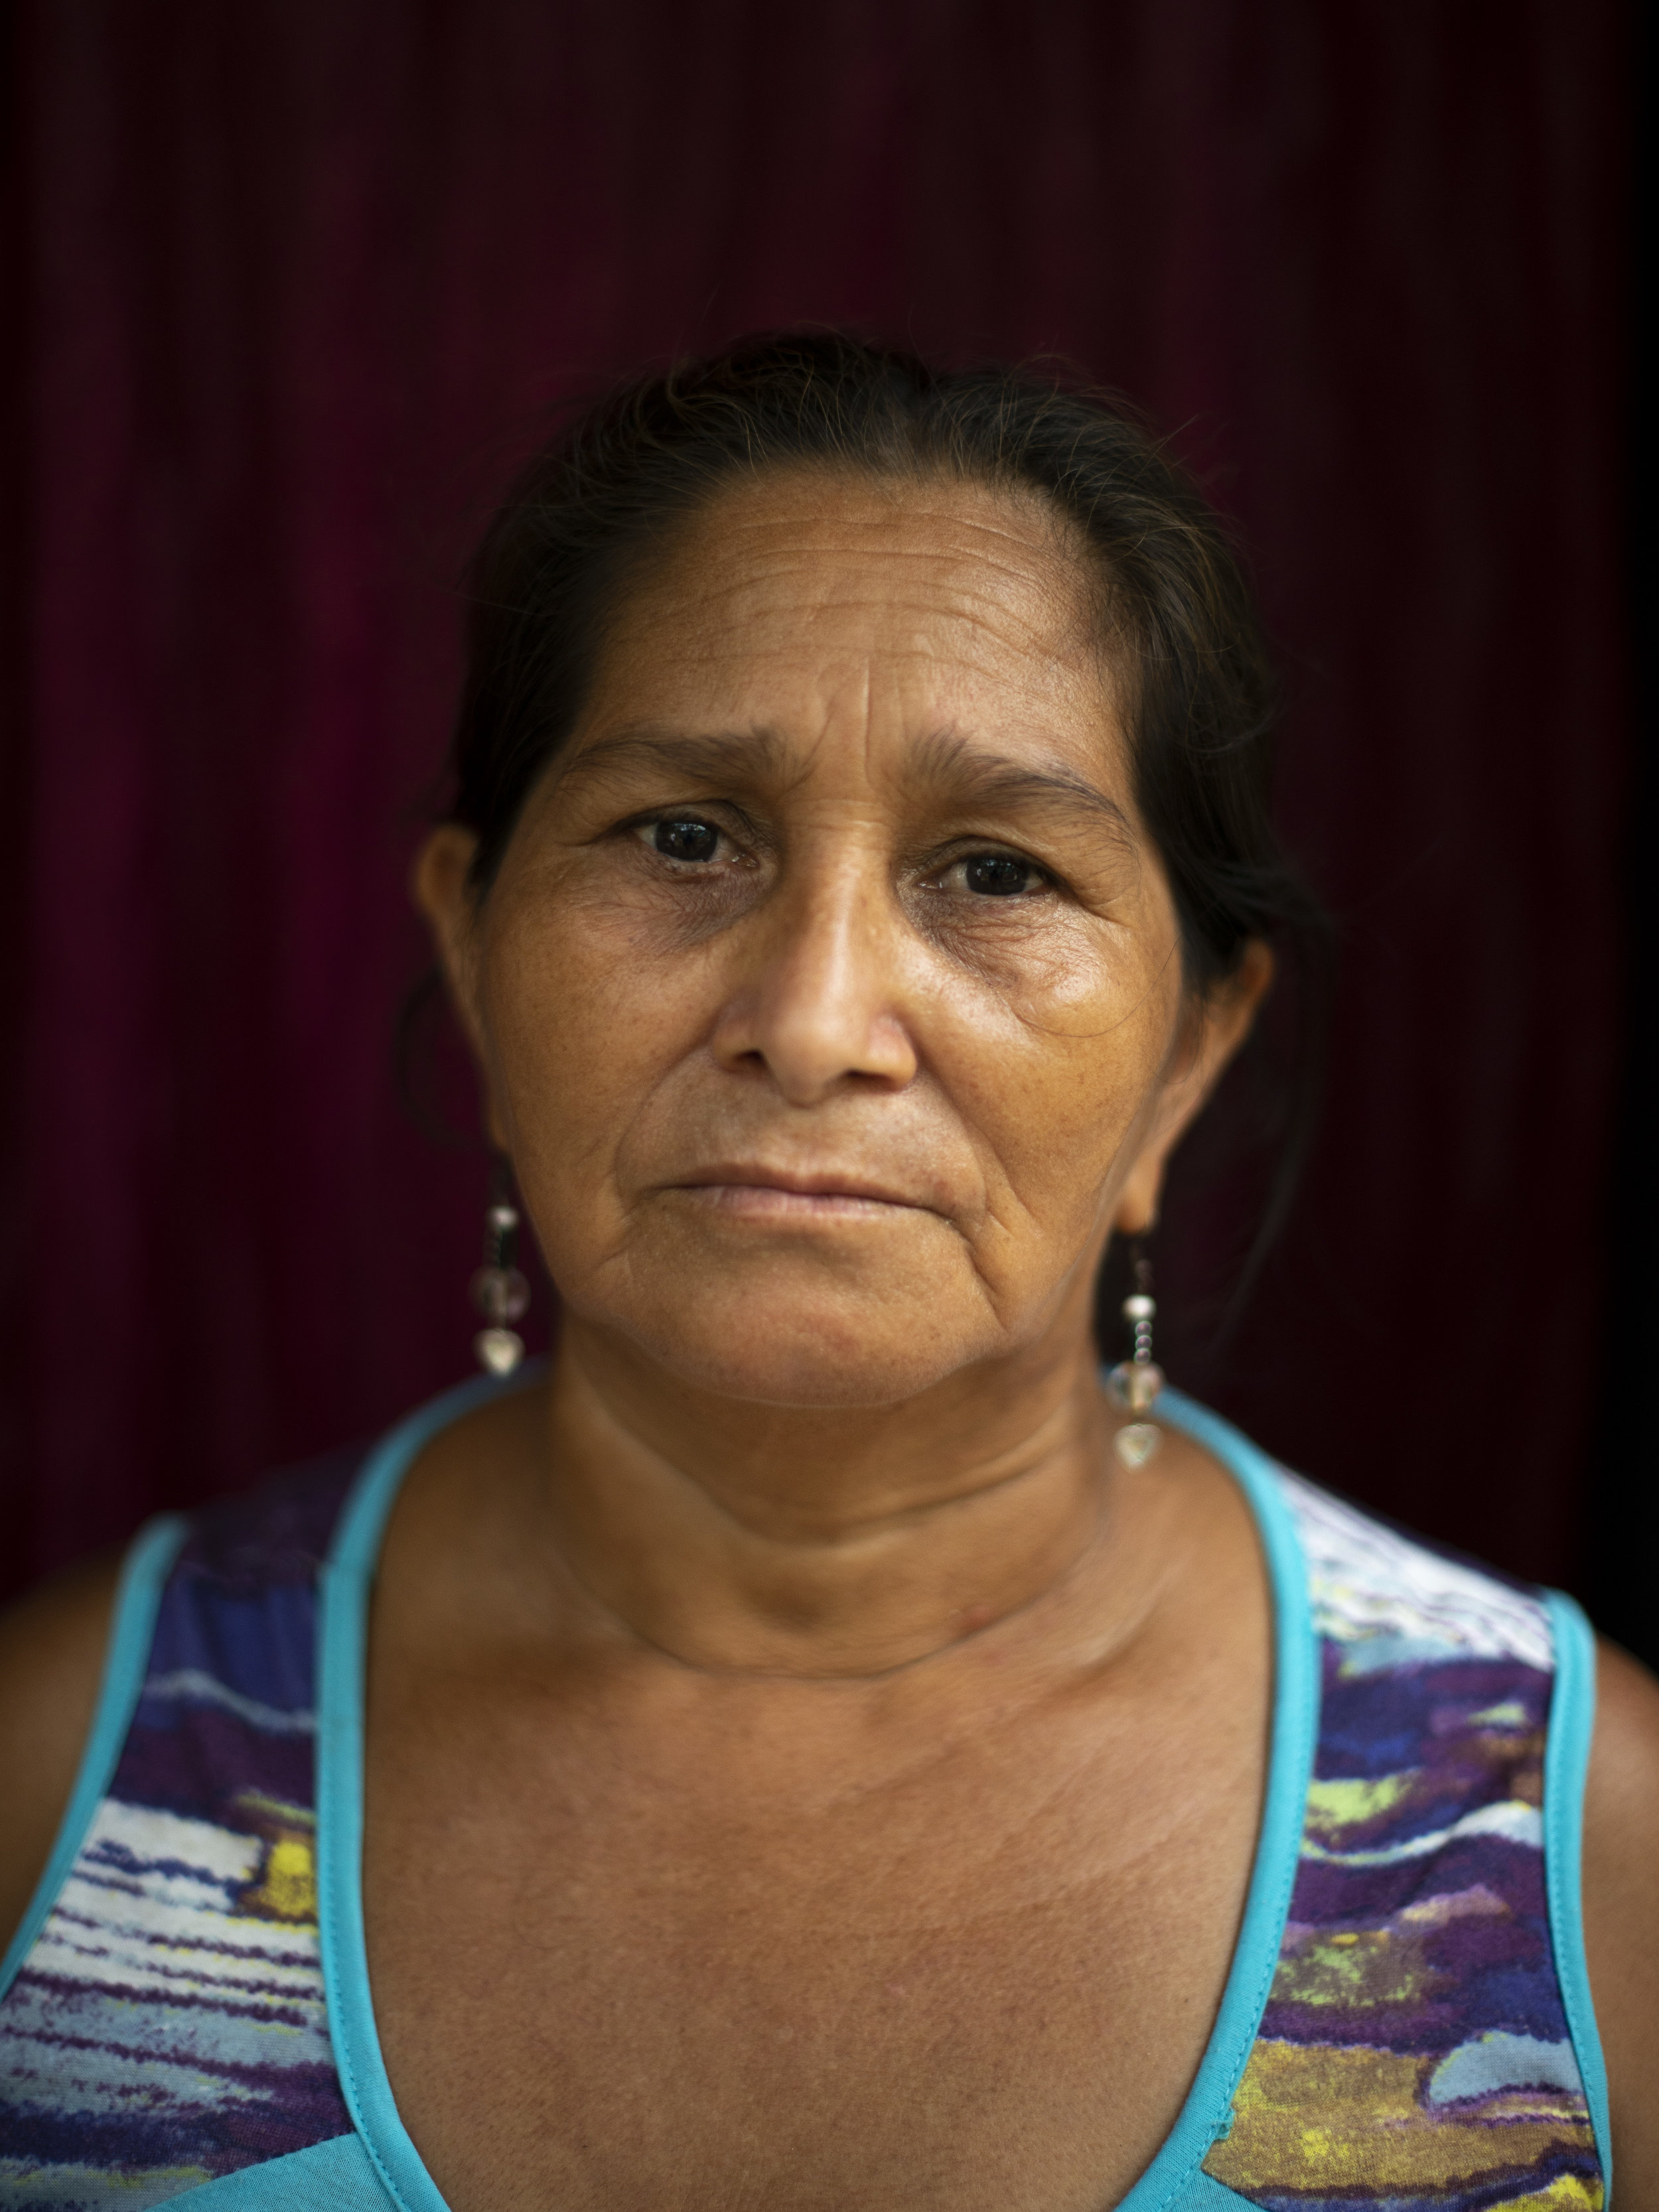  In the gang controlled neighbourhoods of Honduras, there are limited options for residents when facing the threat of violence. In a country with understaffed police forces, Hondurans must leave the country to ensure their safety. Two of Gladys’ sons